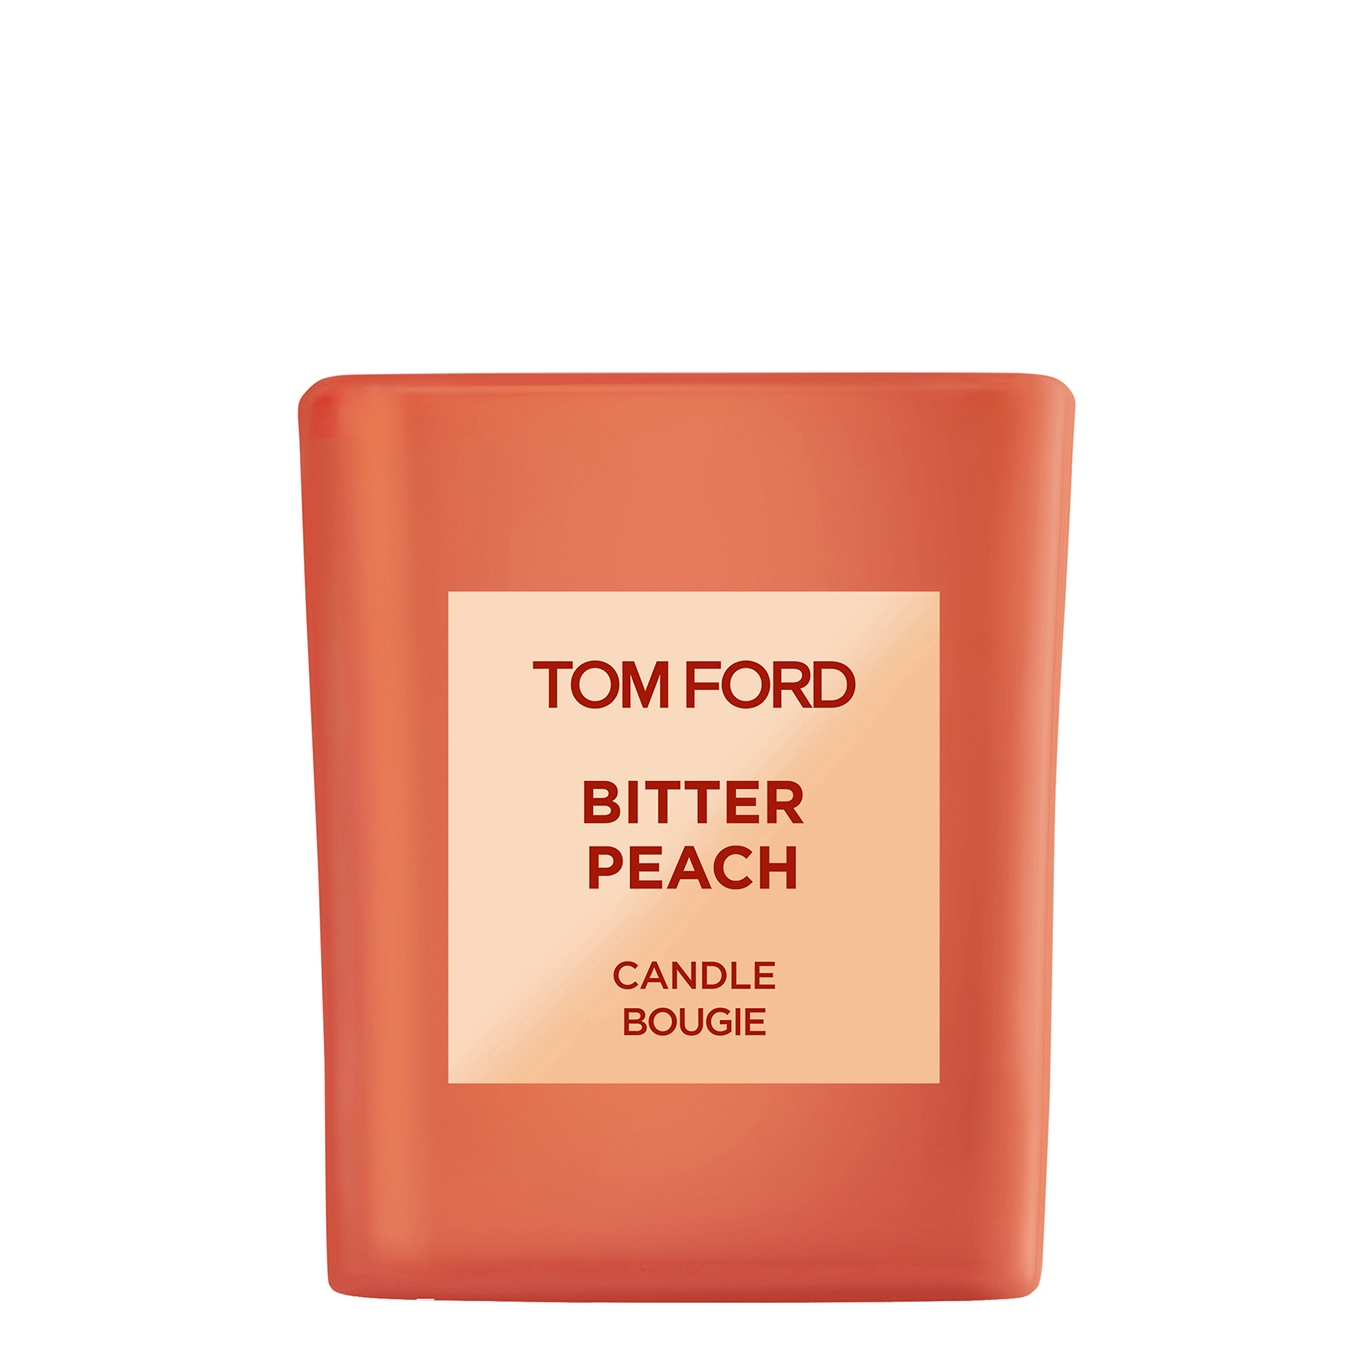 Tom Ford Bitter Peach Candle, Fragrance, Lace, Vanilla and Tonka Bean